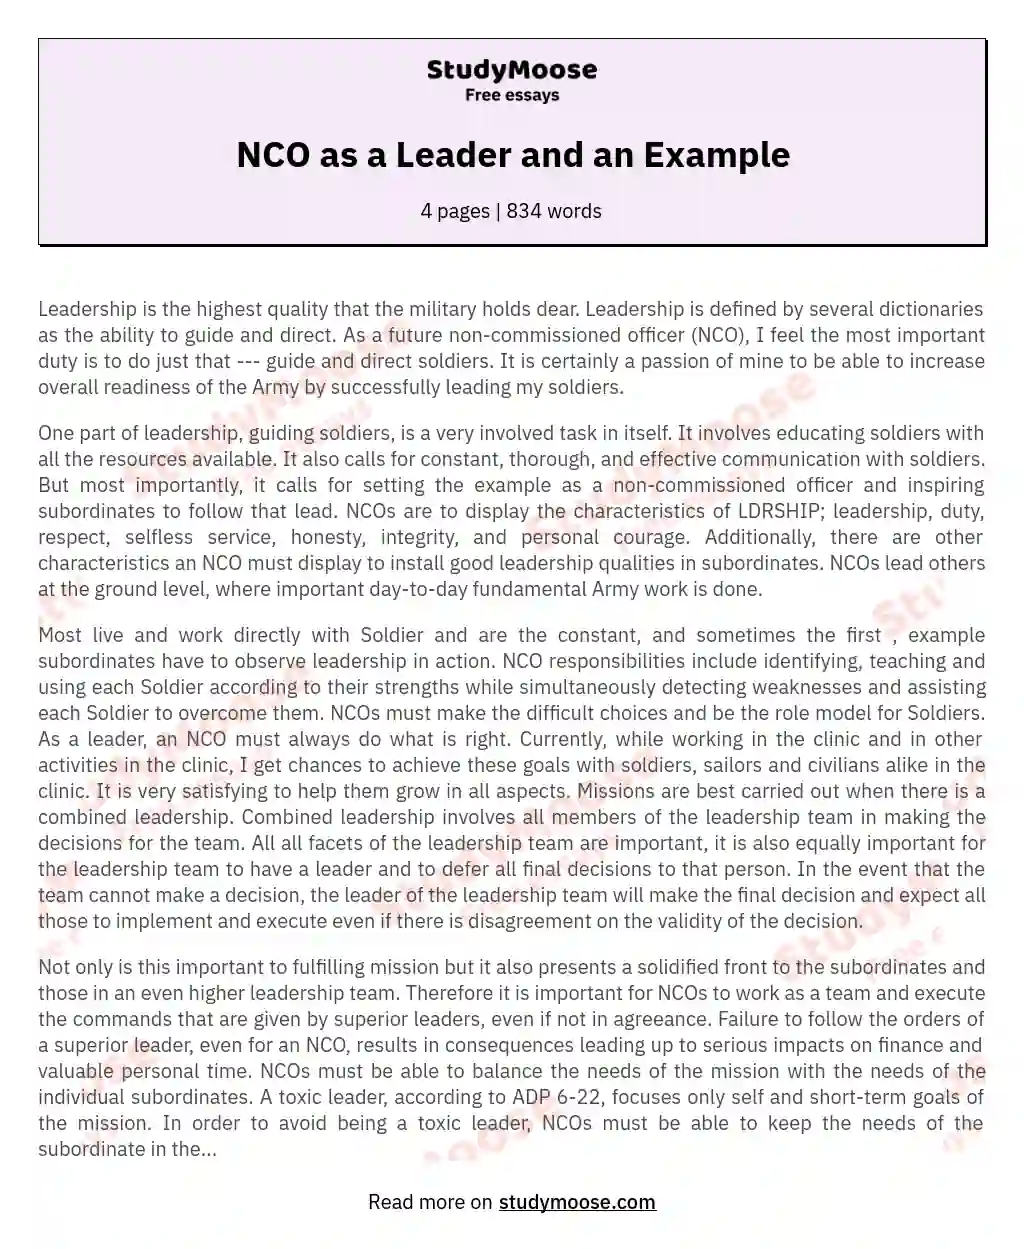 NCO as a Leader and an Example